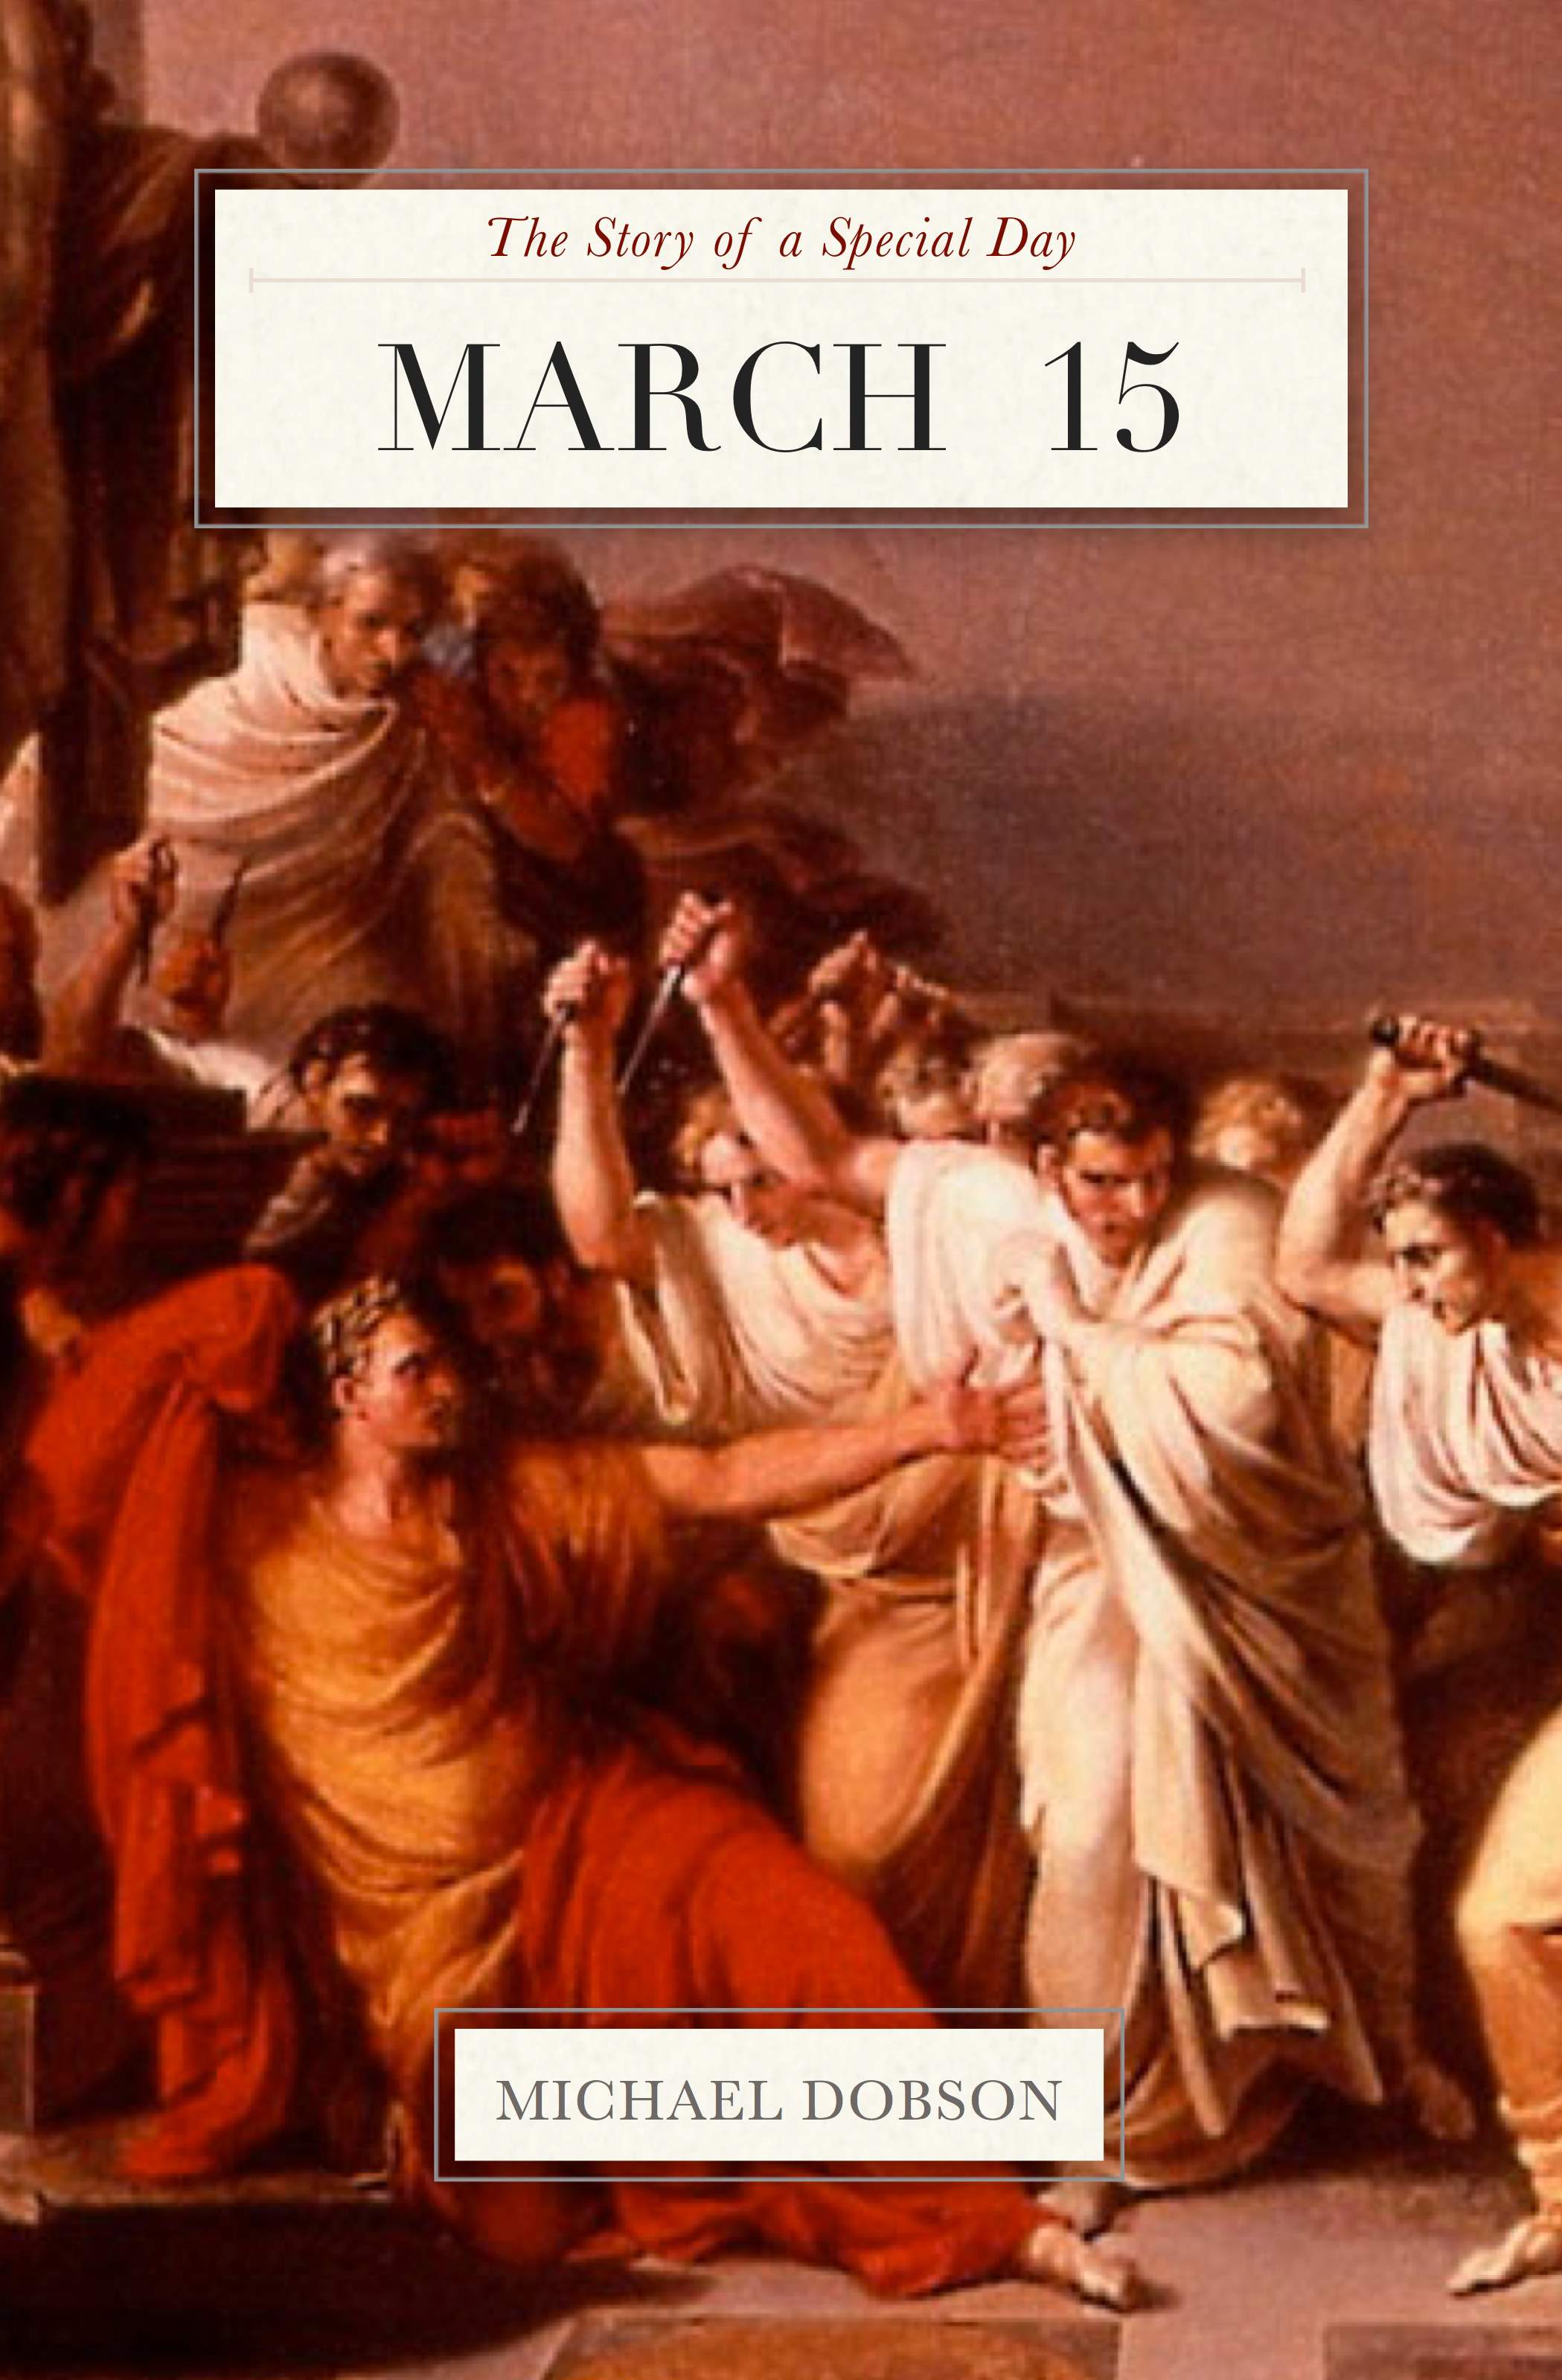 The Ides of March in Ancient Rome Timespinner Press